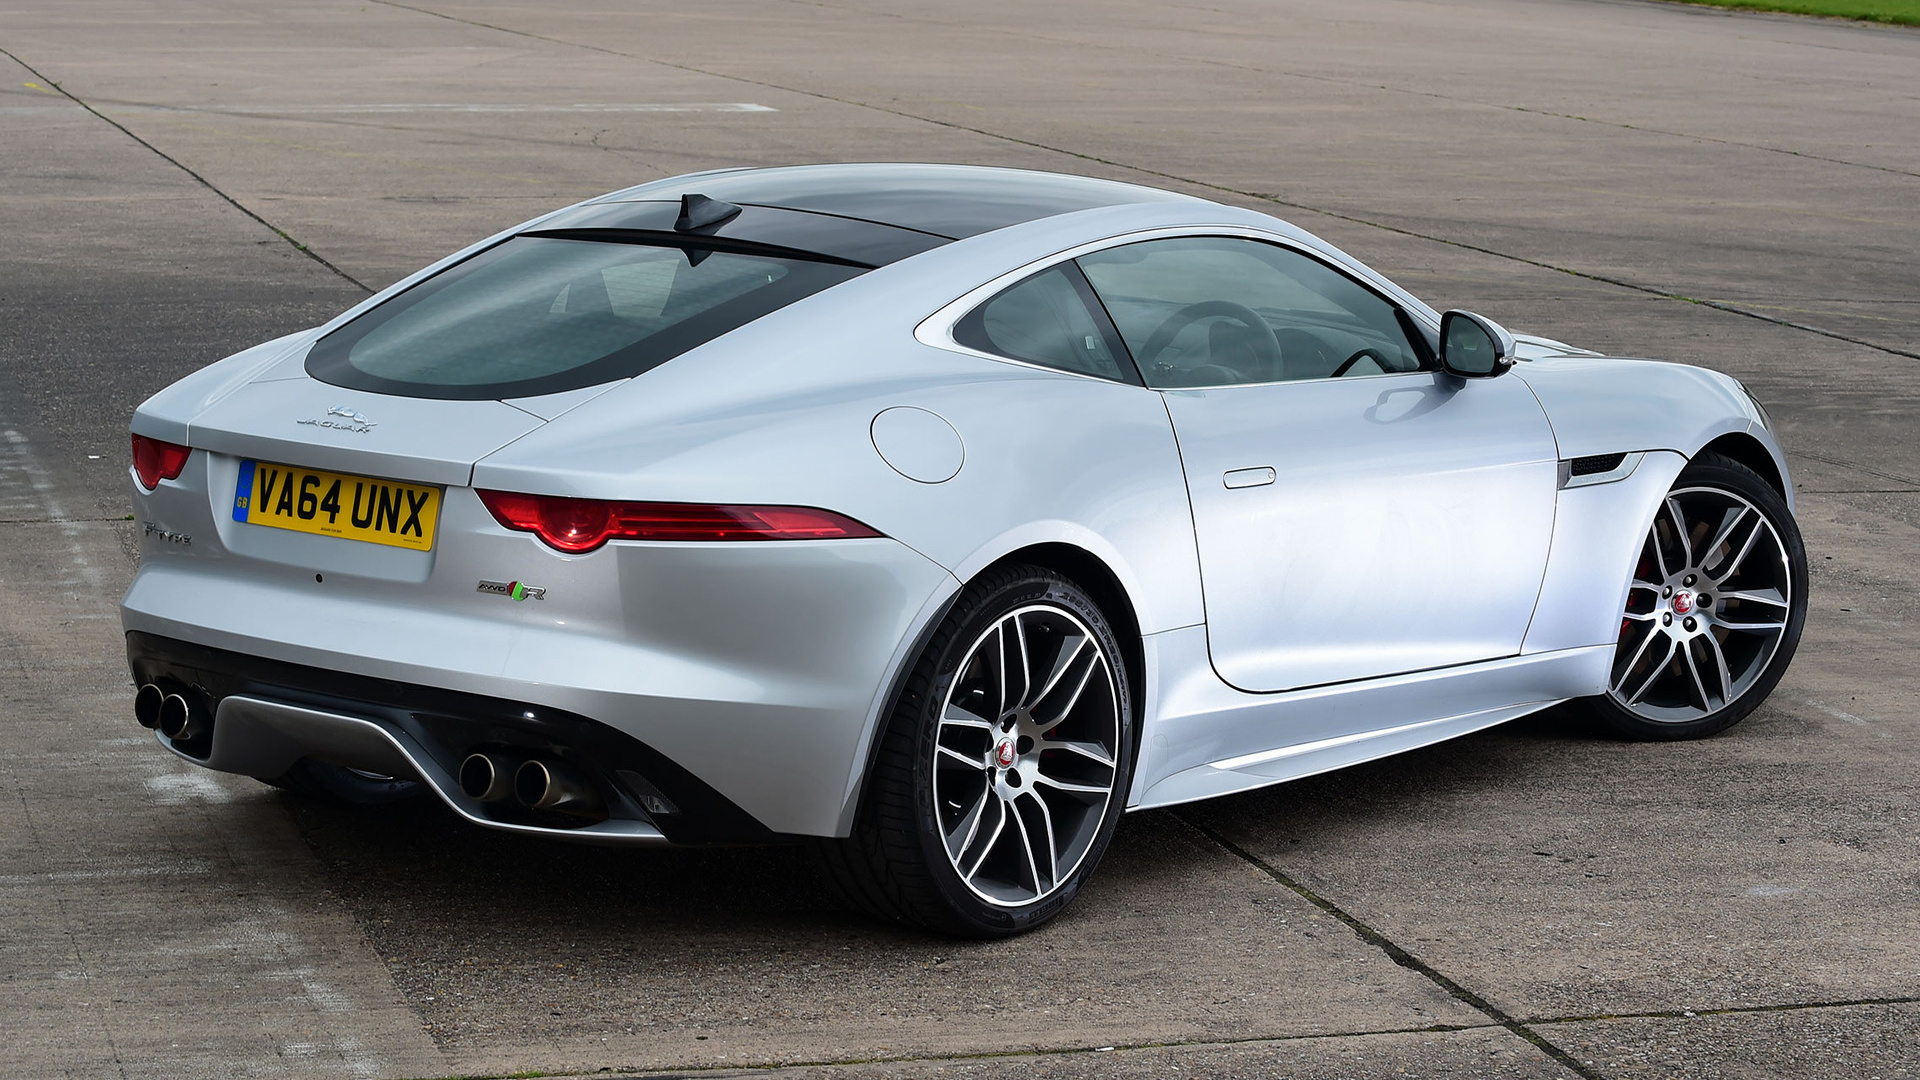 2014 Jaguar F-Type R Coupe (UK) - Wallpapers and HD Images ...